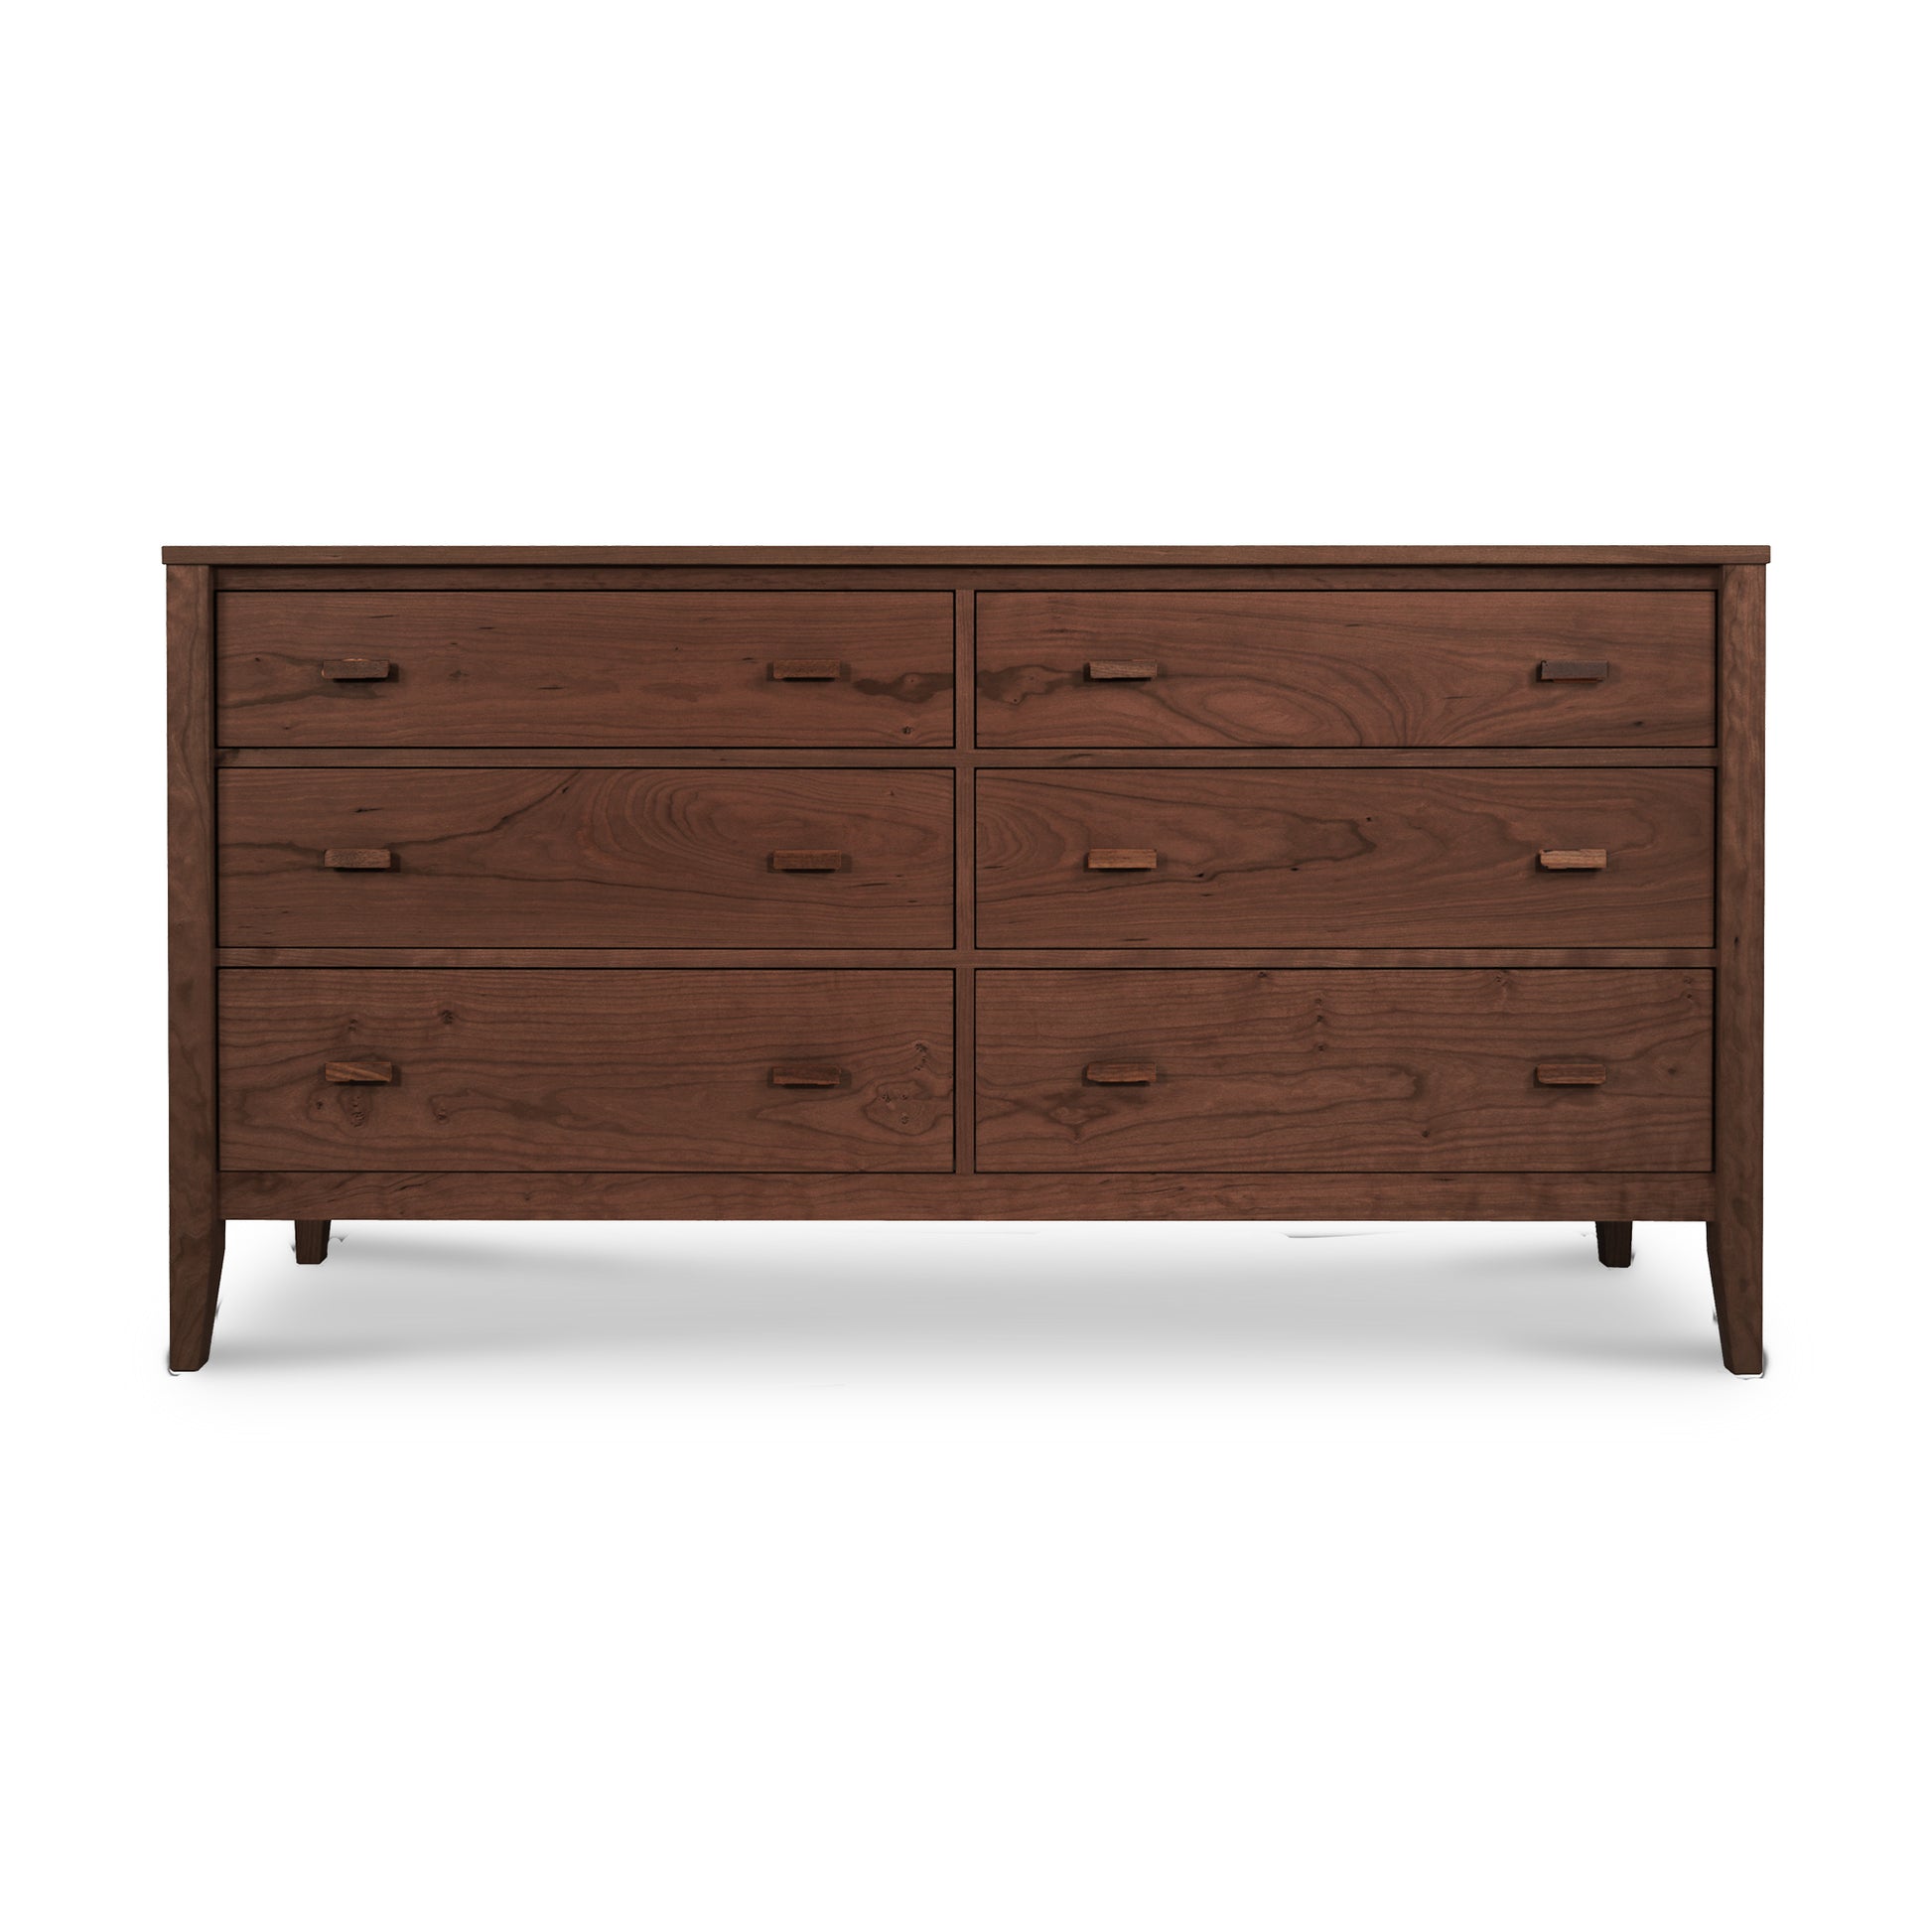 A wooden dresser with six drawers, known as the Maple Corner Woodworks Andover Modern 6-Drawer Dresser, features a rich brown finish and sleek, horizontal handles. The dresser has a minimalist design with smooth.